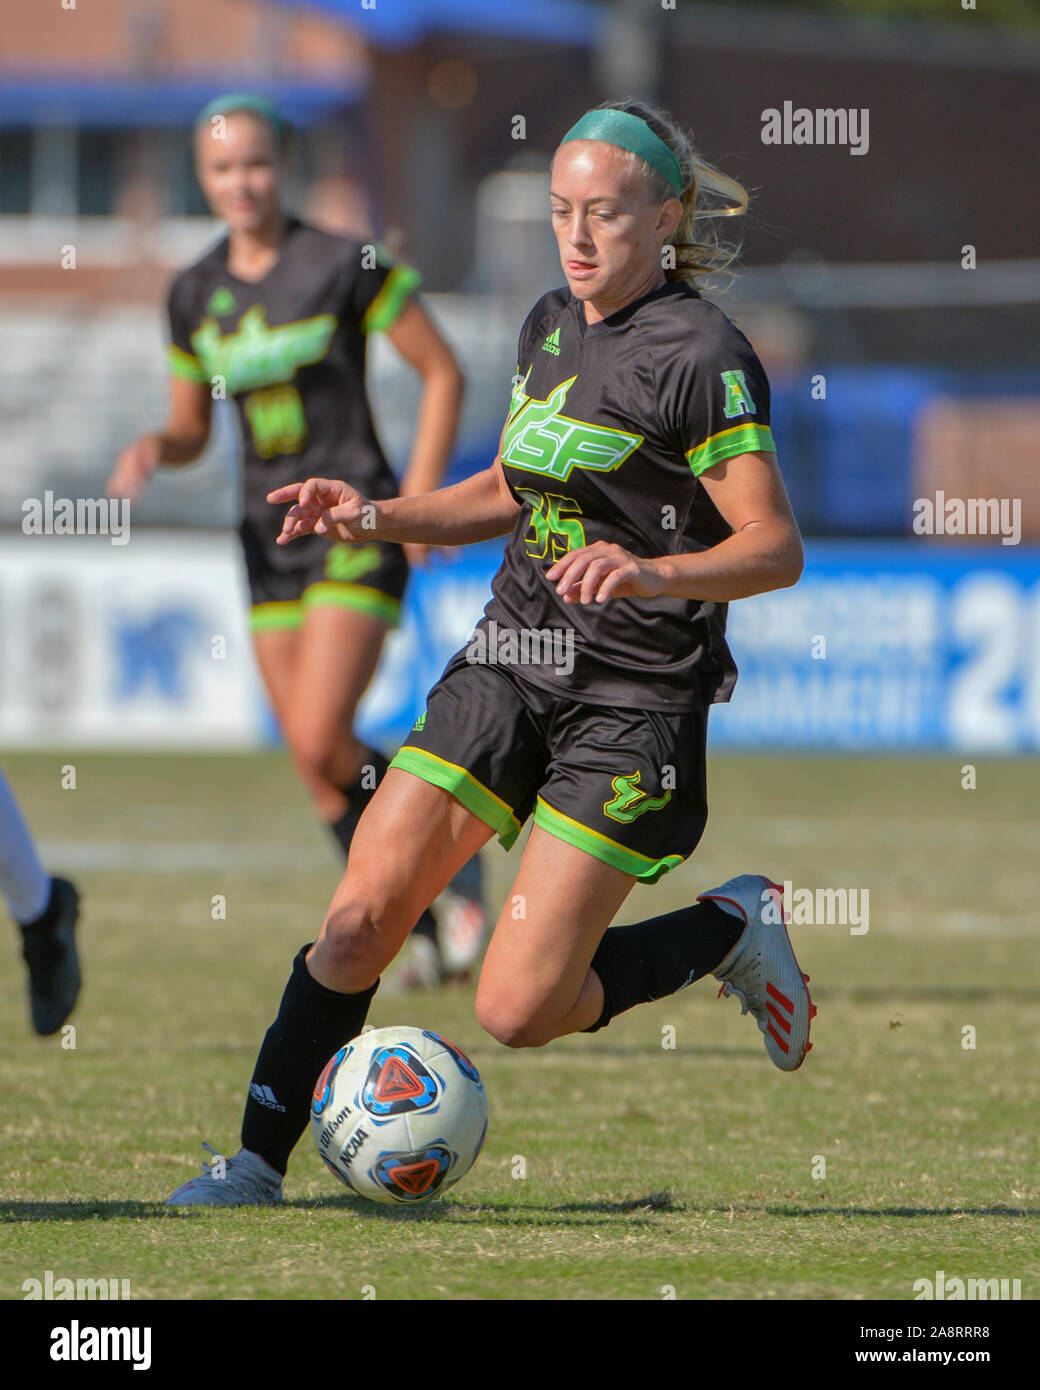 Memphis, TN, USA. 10th Nov, 2019. South Florida forward, Sydny Nasello (35), in action during the NCAA Women's Soccer Championship match between the University of South Florida Bulls and the University of Memphis Tigers at The University of Memphis in Memphis, TN. Kevin Langley/Sports South Media/CSM/Alamy Live News Stock Photo